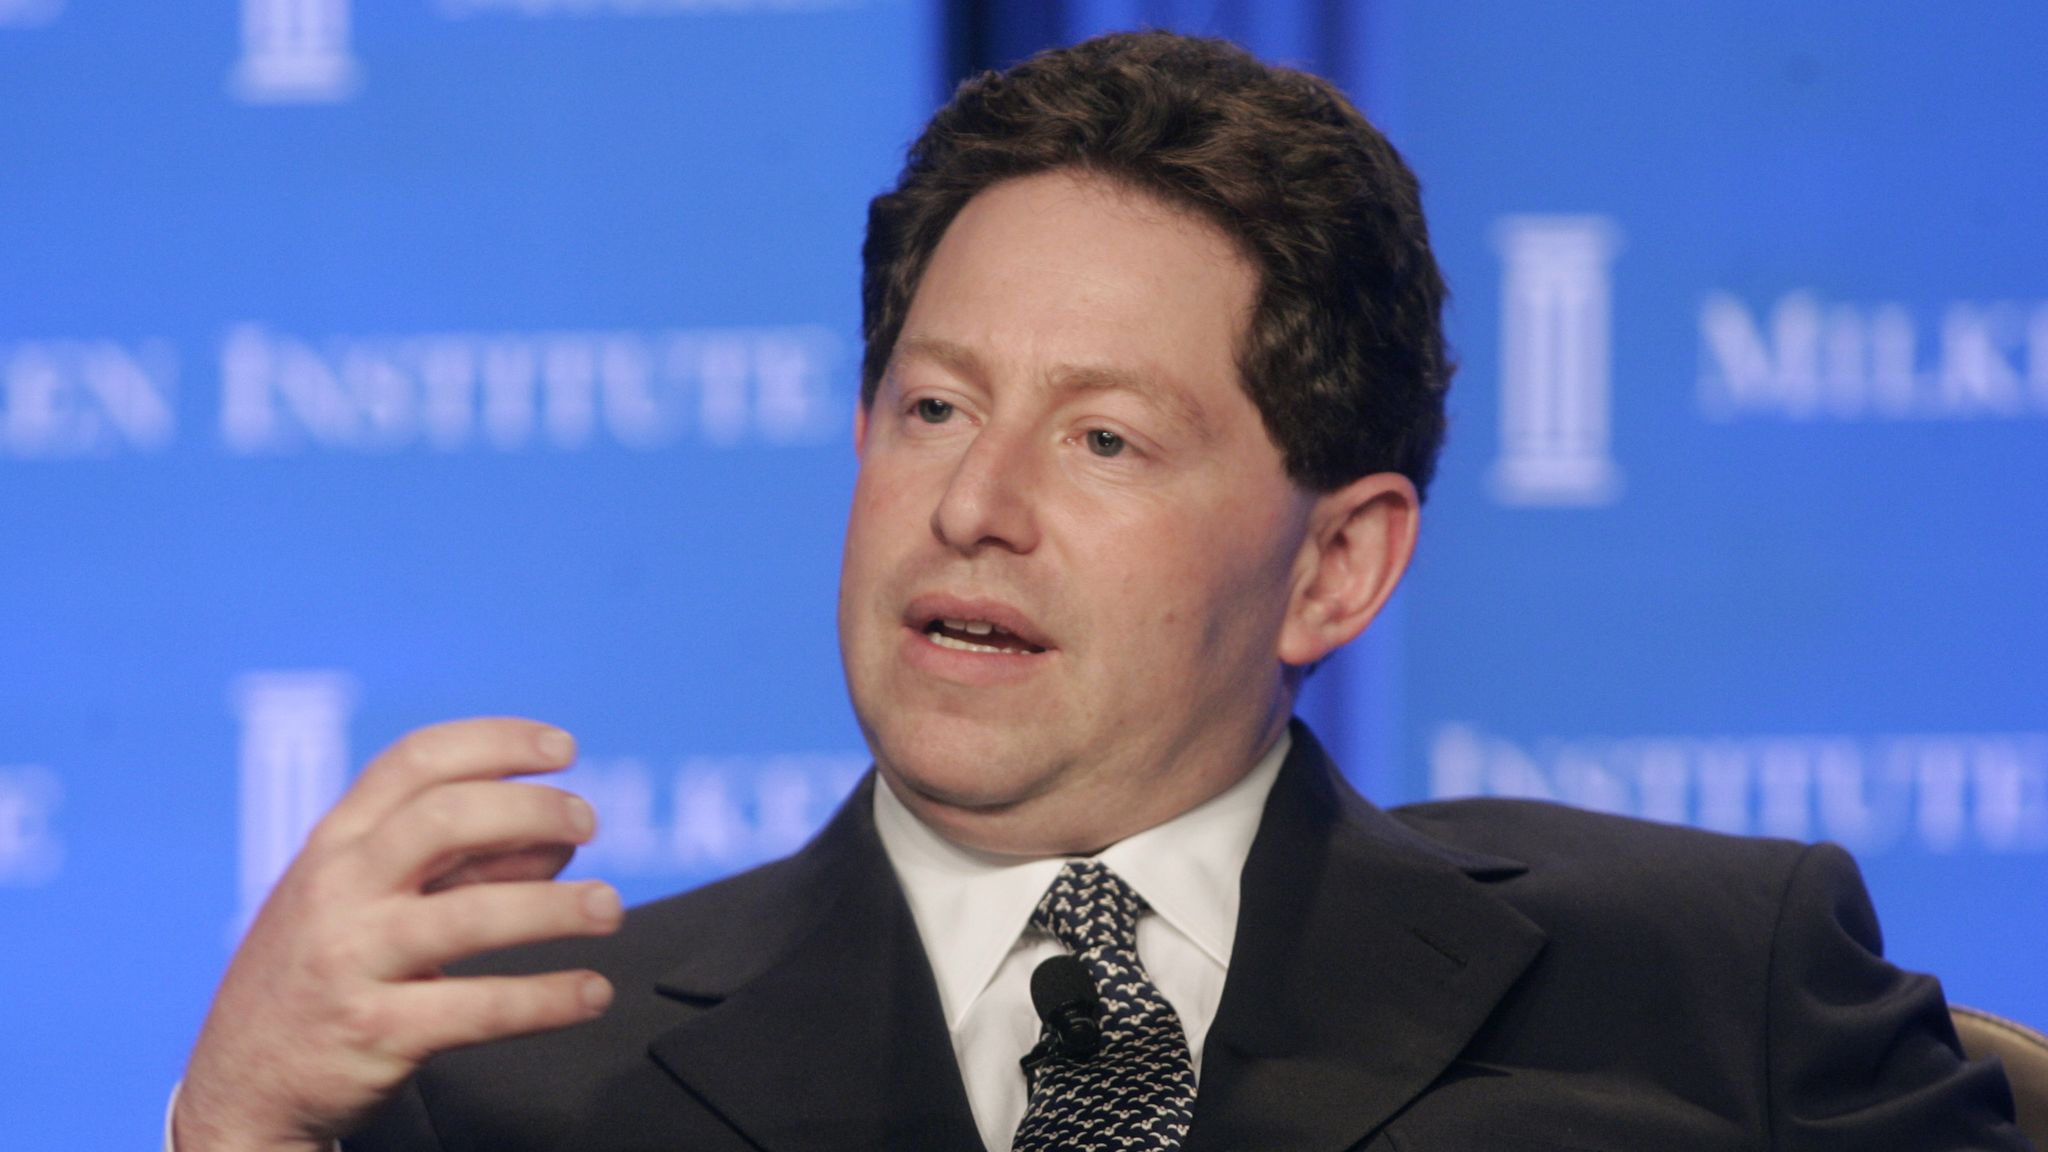 Robert Kotick, chairman and CEO, Activision, Inc. takes part in a panel session titled "Intellectual Property and the Future of the Entertainment Industry at the 2005 Milken Institute Global Conference in Beverly Hills, California April 20, 2005. The Milken Institute is an independent economic think tank, which works to improve the lives and economic conditions of diverse populations in the United States and around the world. REUTERS/Fred Prouser FSP